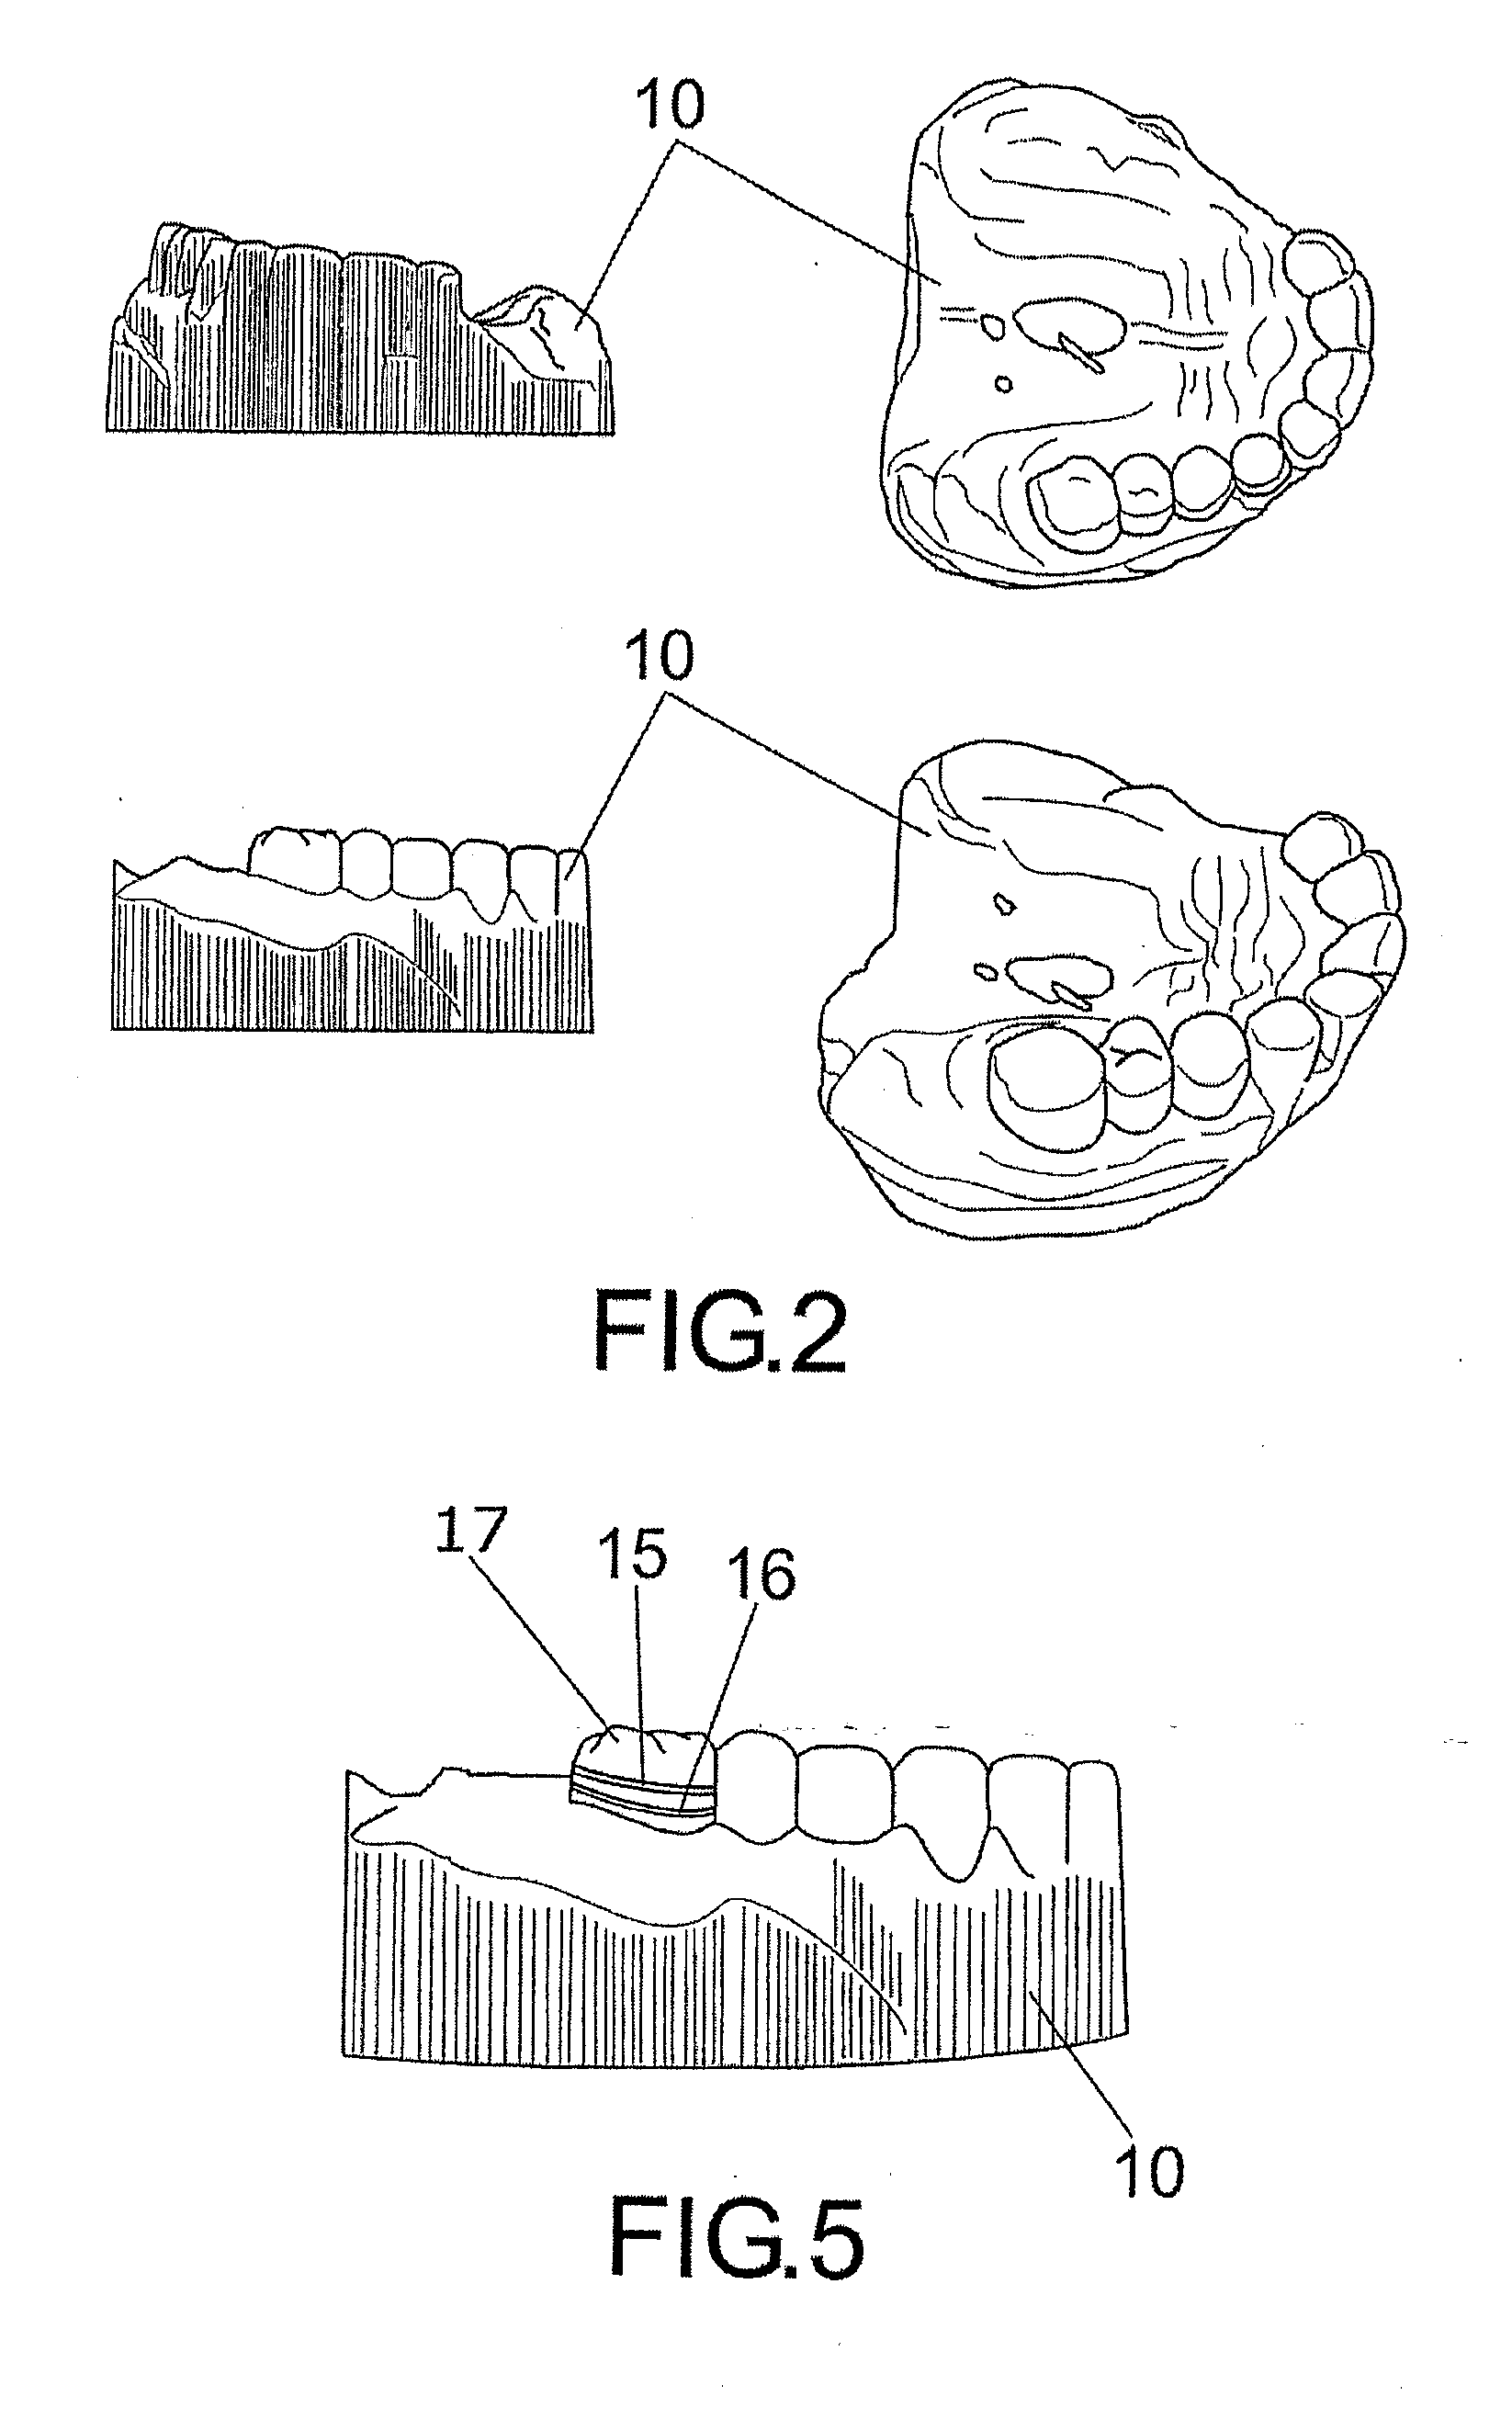 Method for manufacturing digitally-designed removable dental prostheses and system required for this purpose